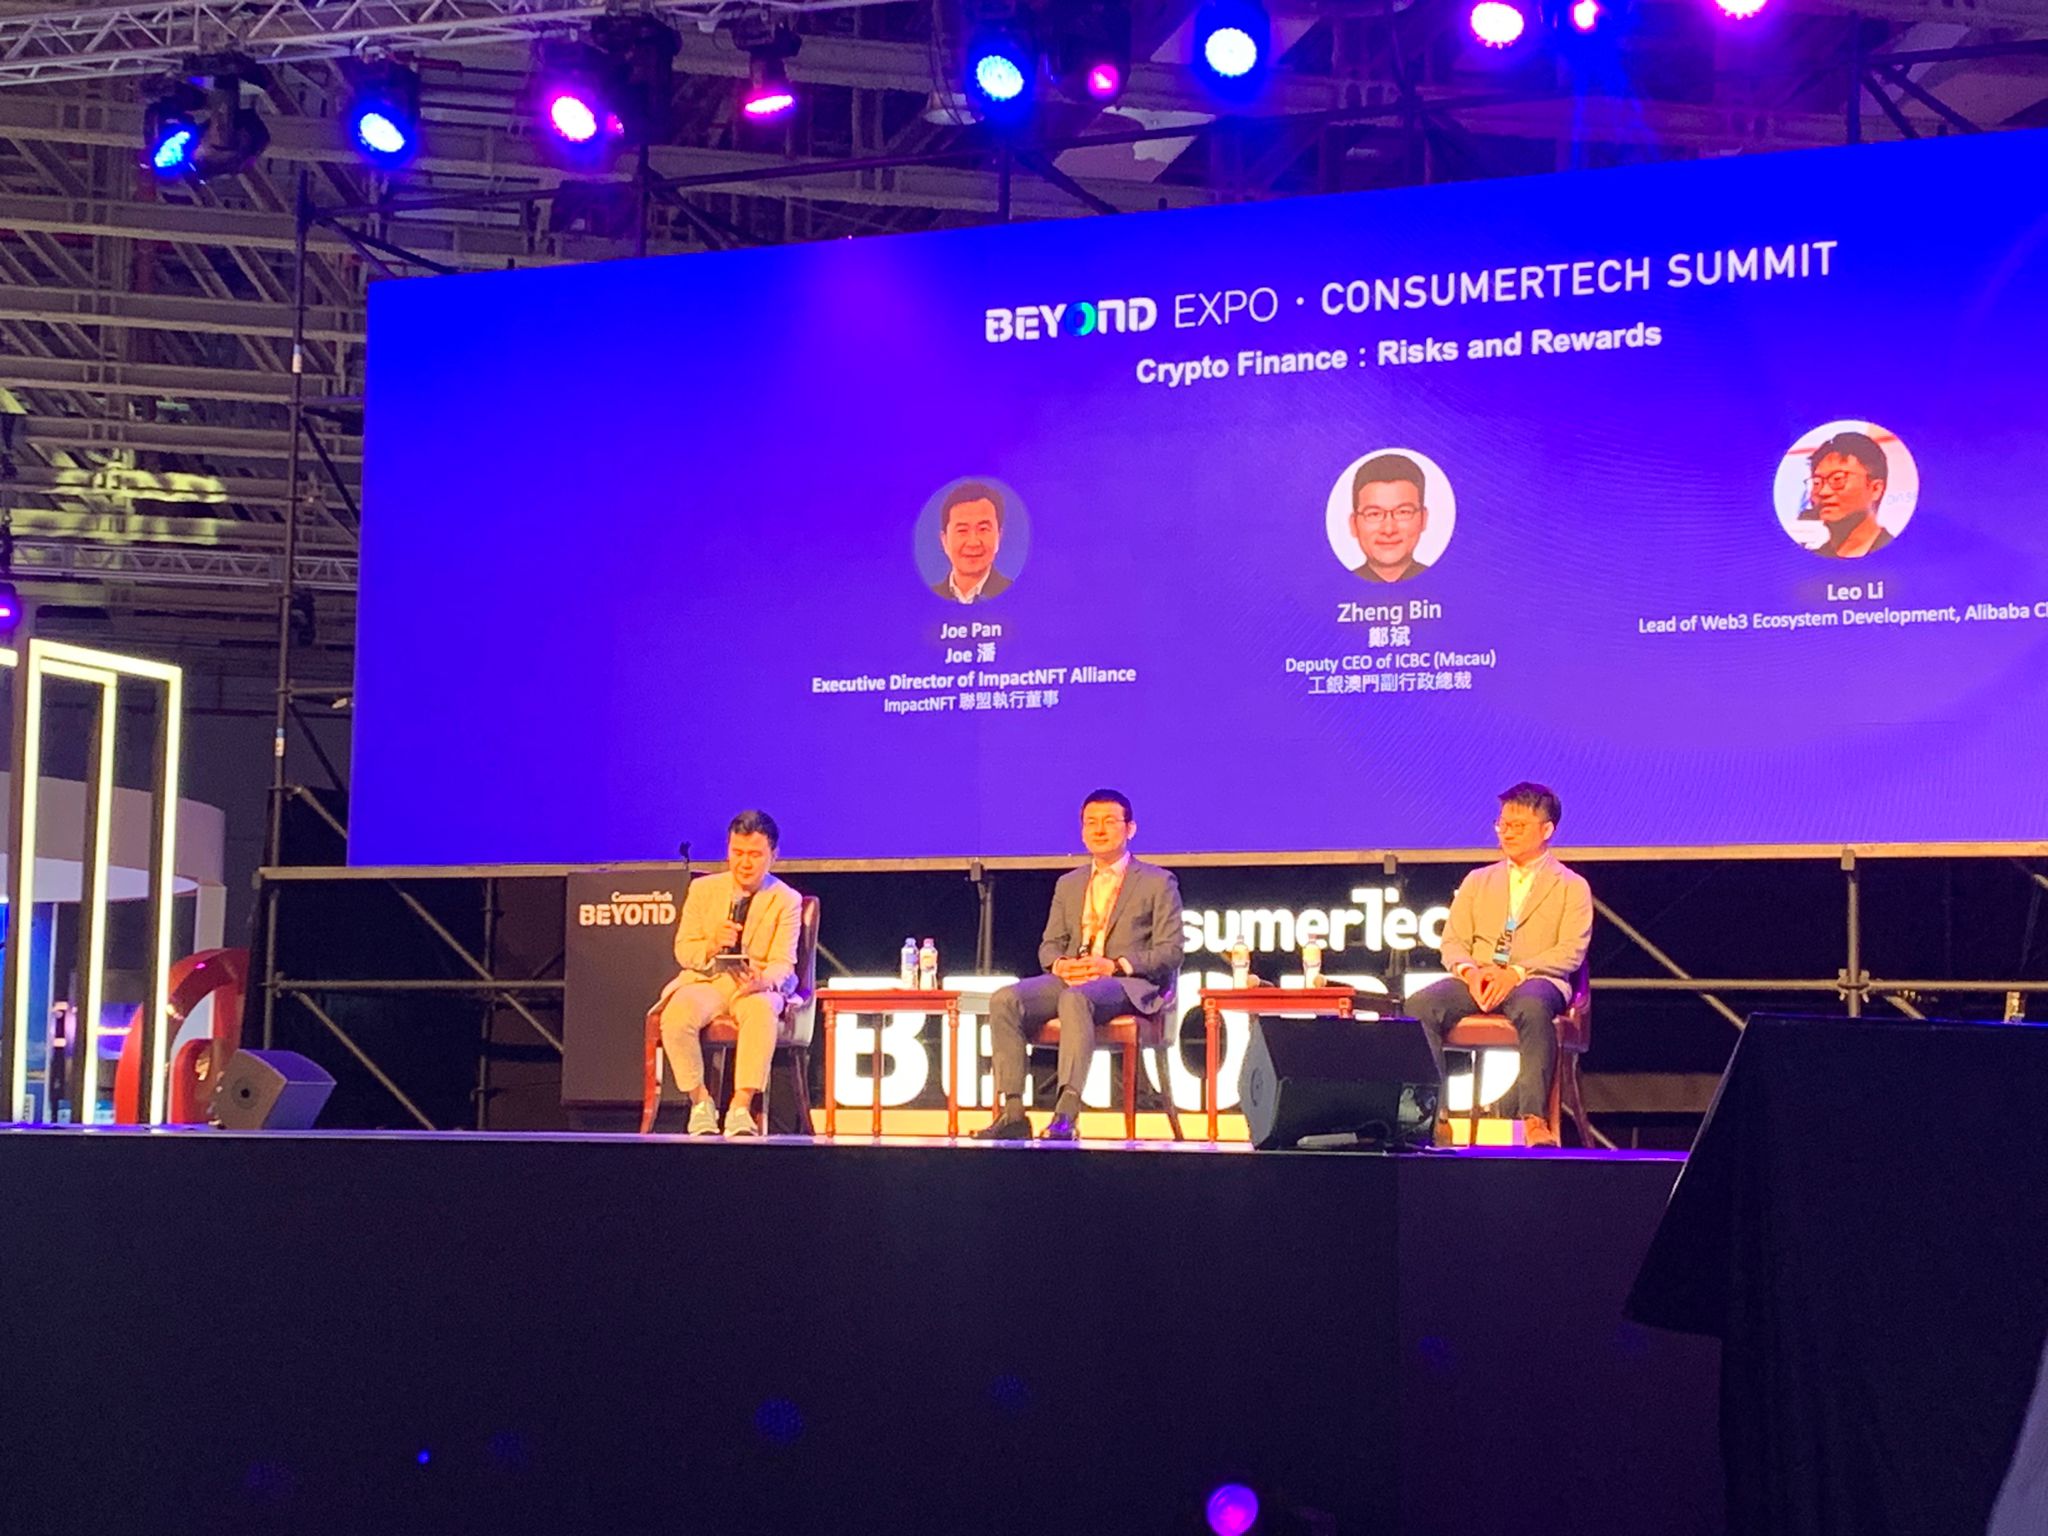 BEYOND Expo Summit: Wide Application of Blockchain and Other Technologies in Banks – Panelists